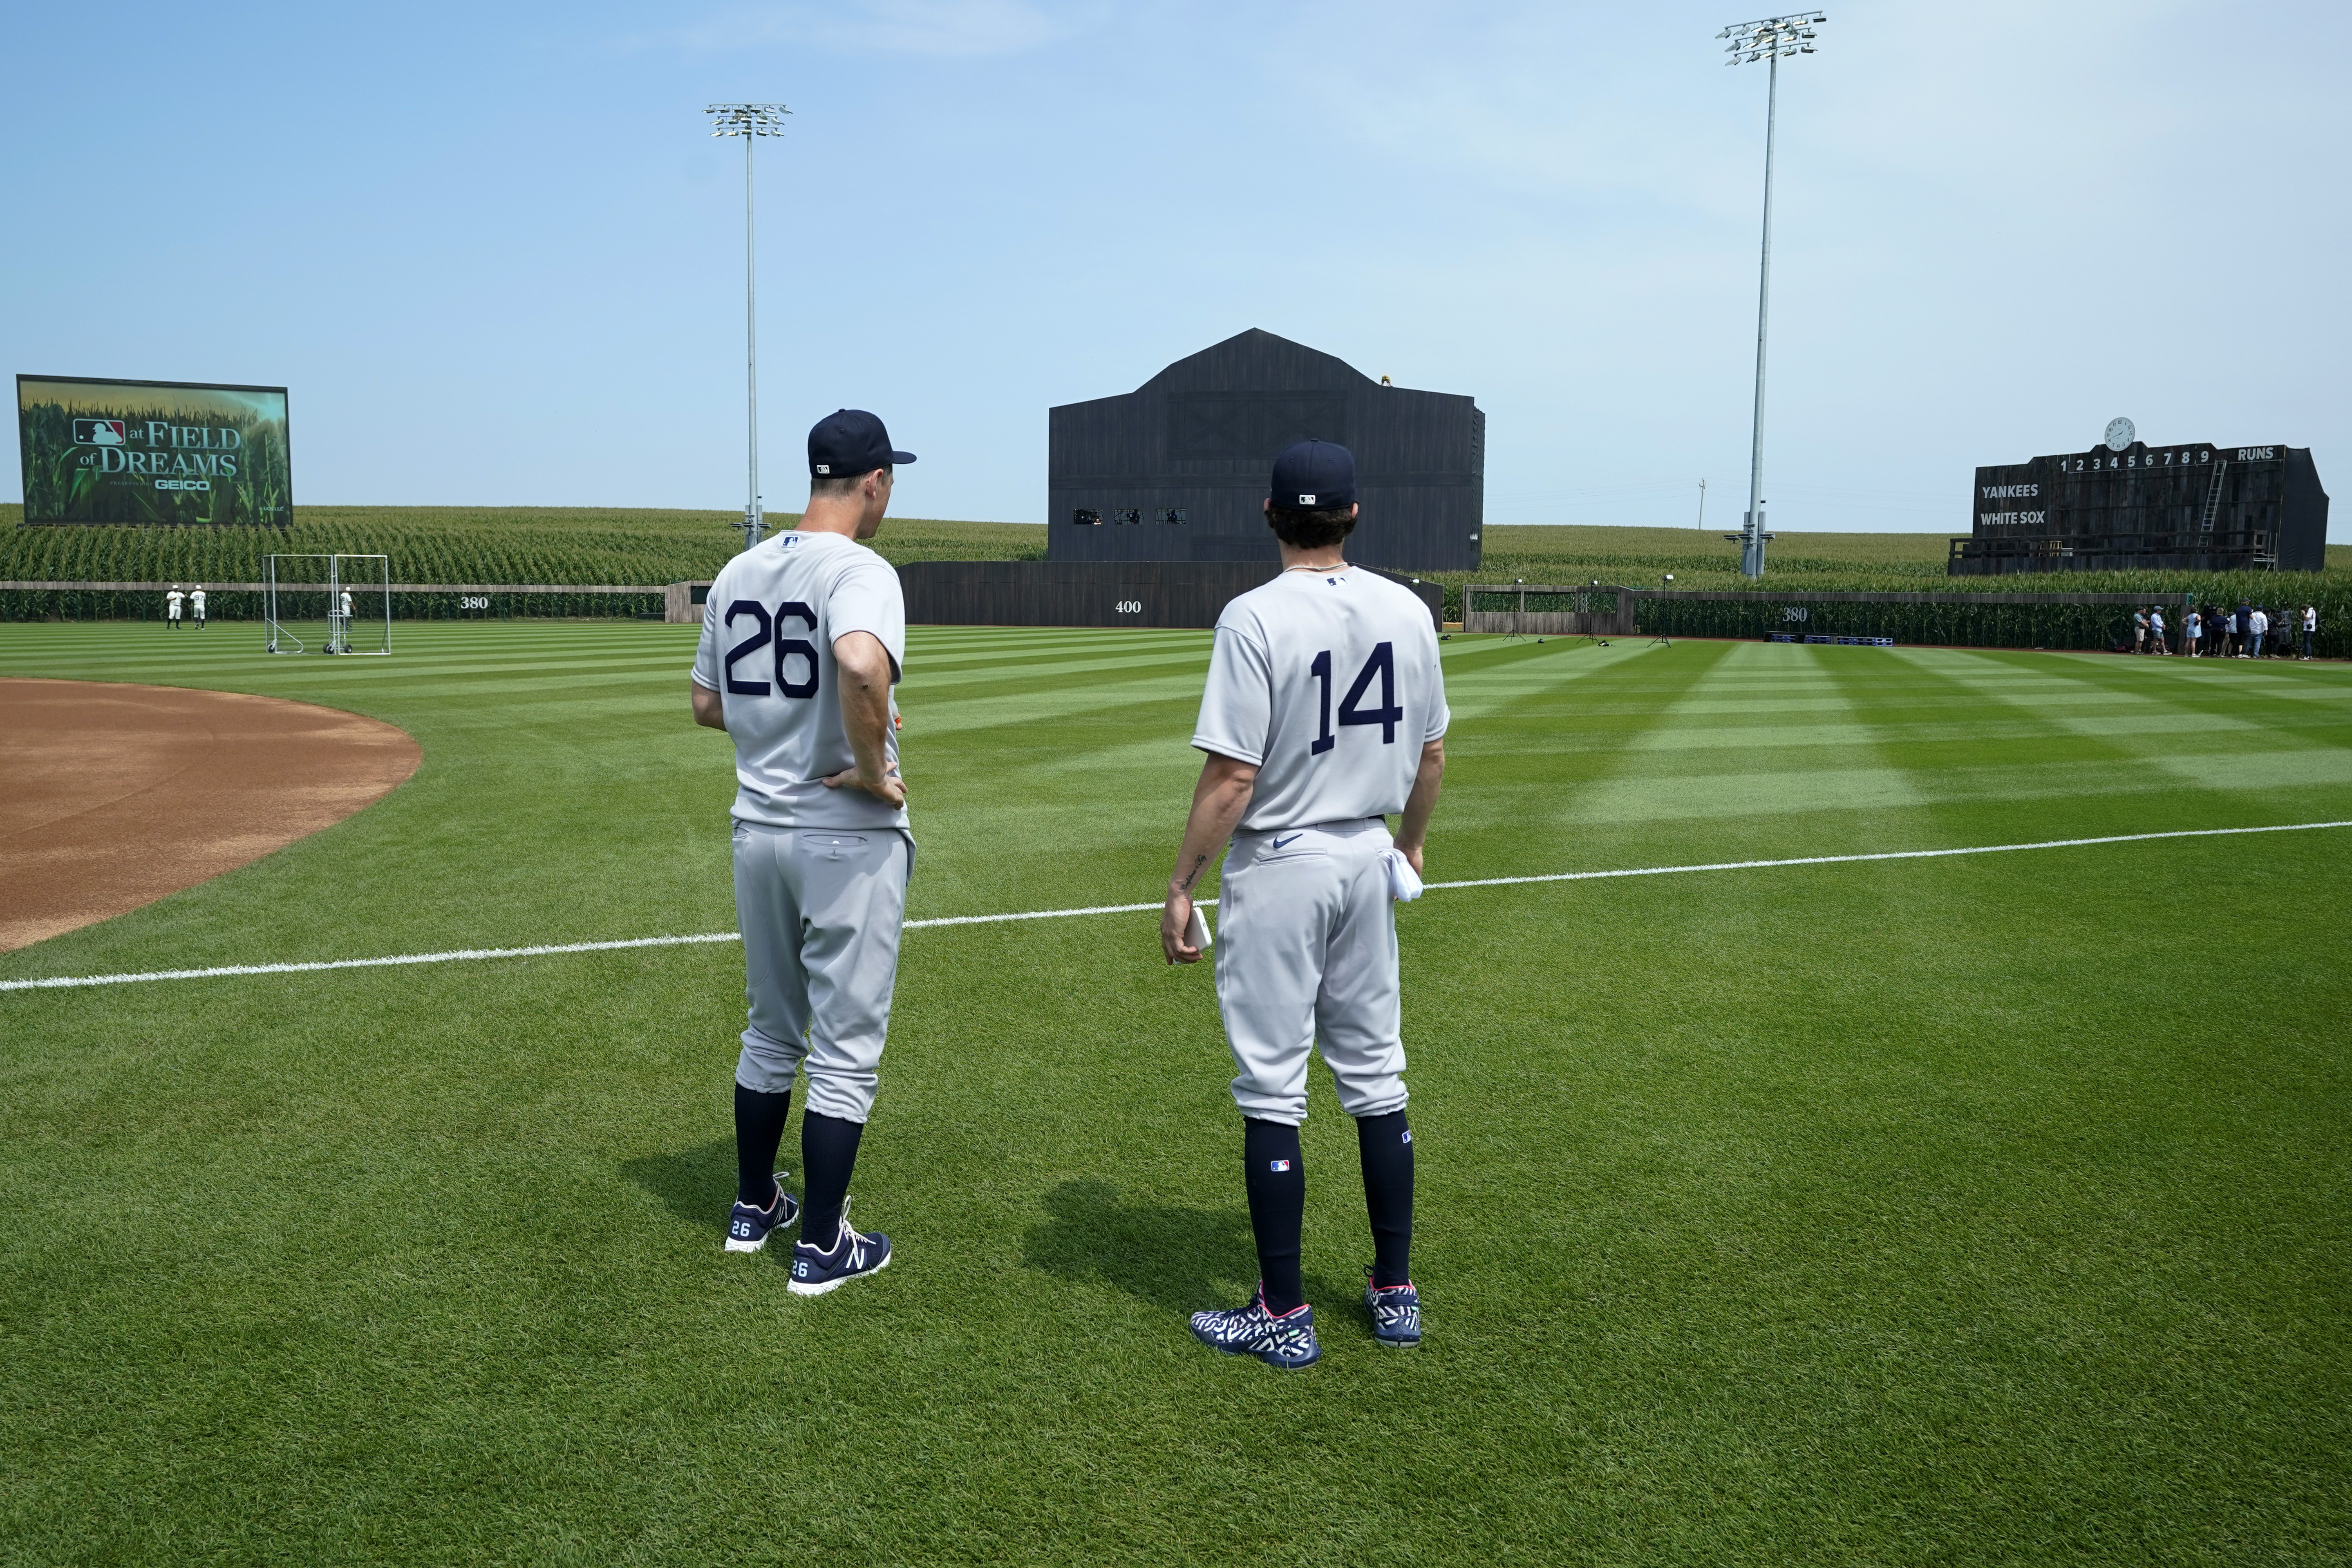 Aaron Judge Liam Hendriks Field Of Dreams Baseball Game 11x14 Matted 8x12  Photo Print Ny Yankees & Chicago White Sox At The Corn - Yahoo Shopping